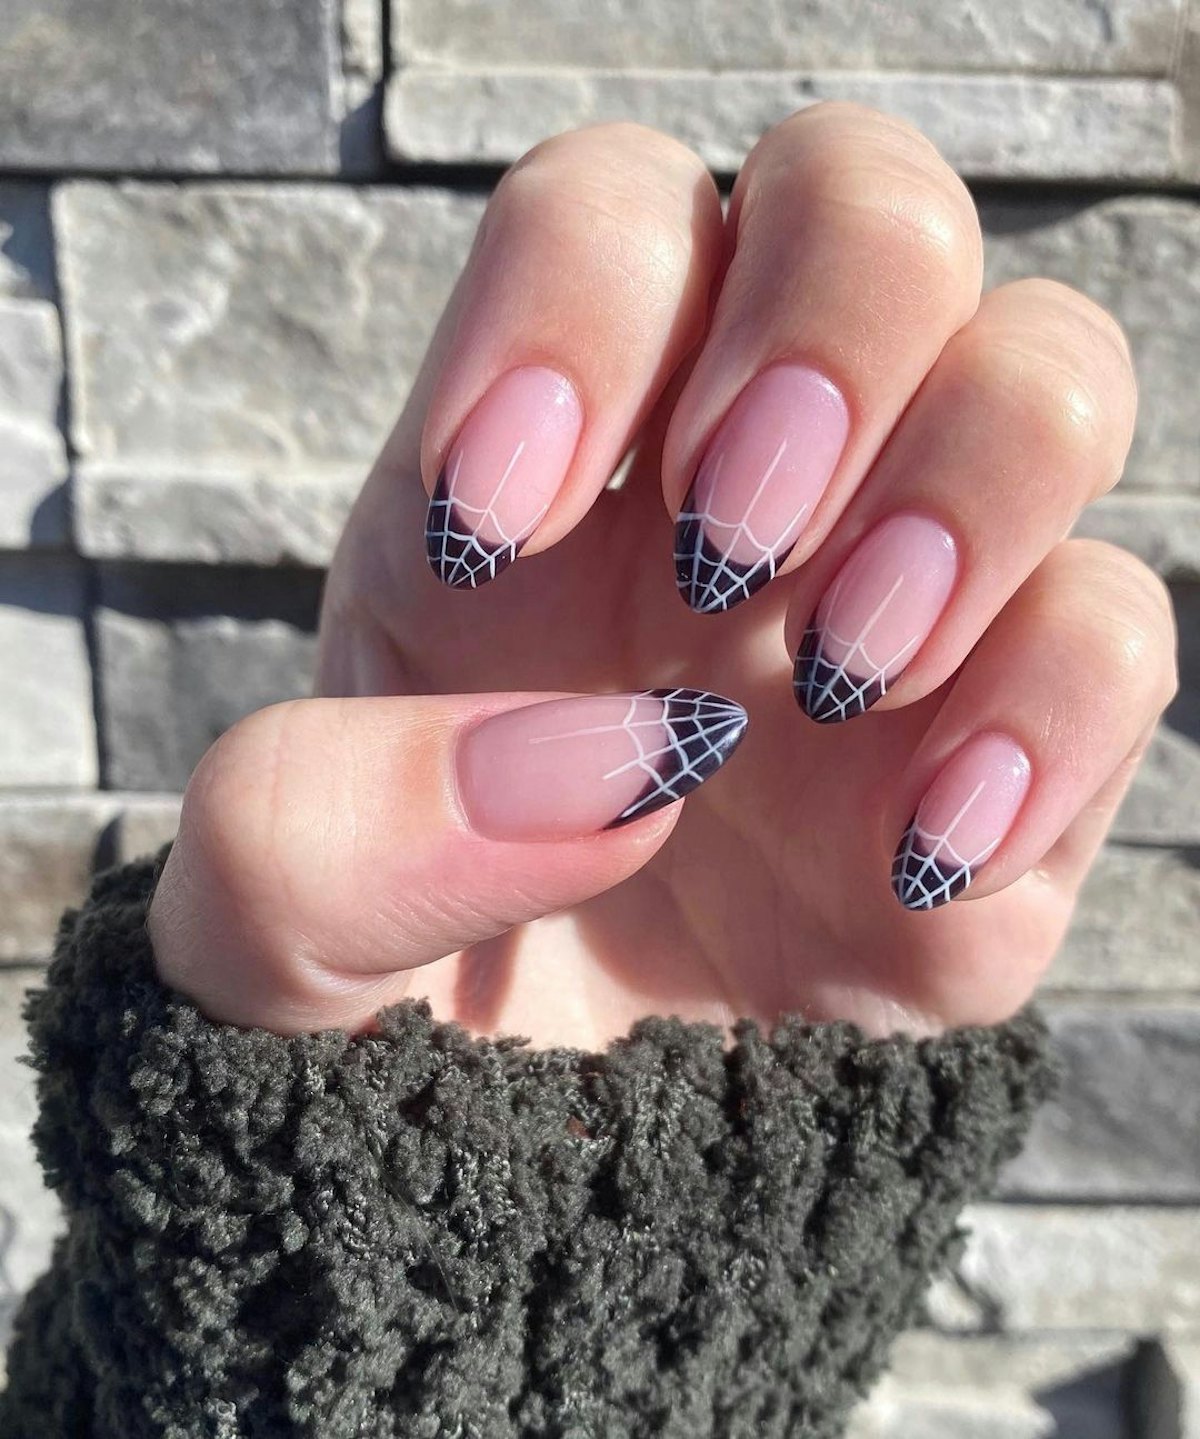 From candy corn to ghosts to spider webs, these spooky manicures (like these spider web nails) are h...